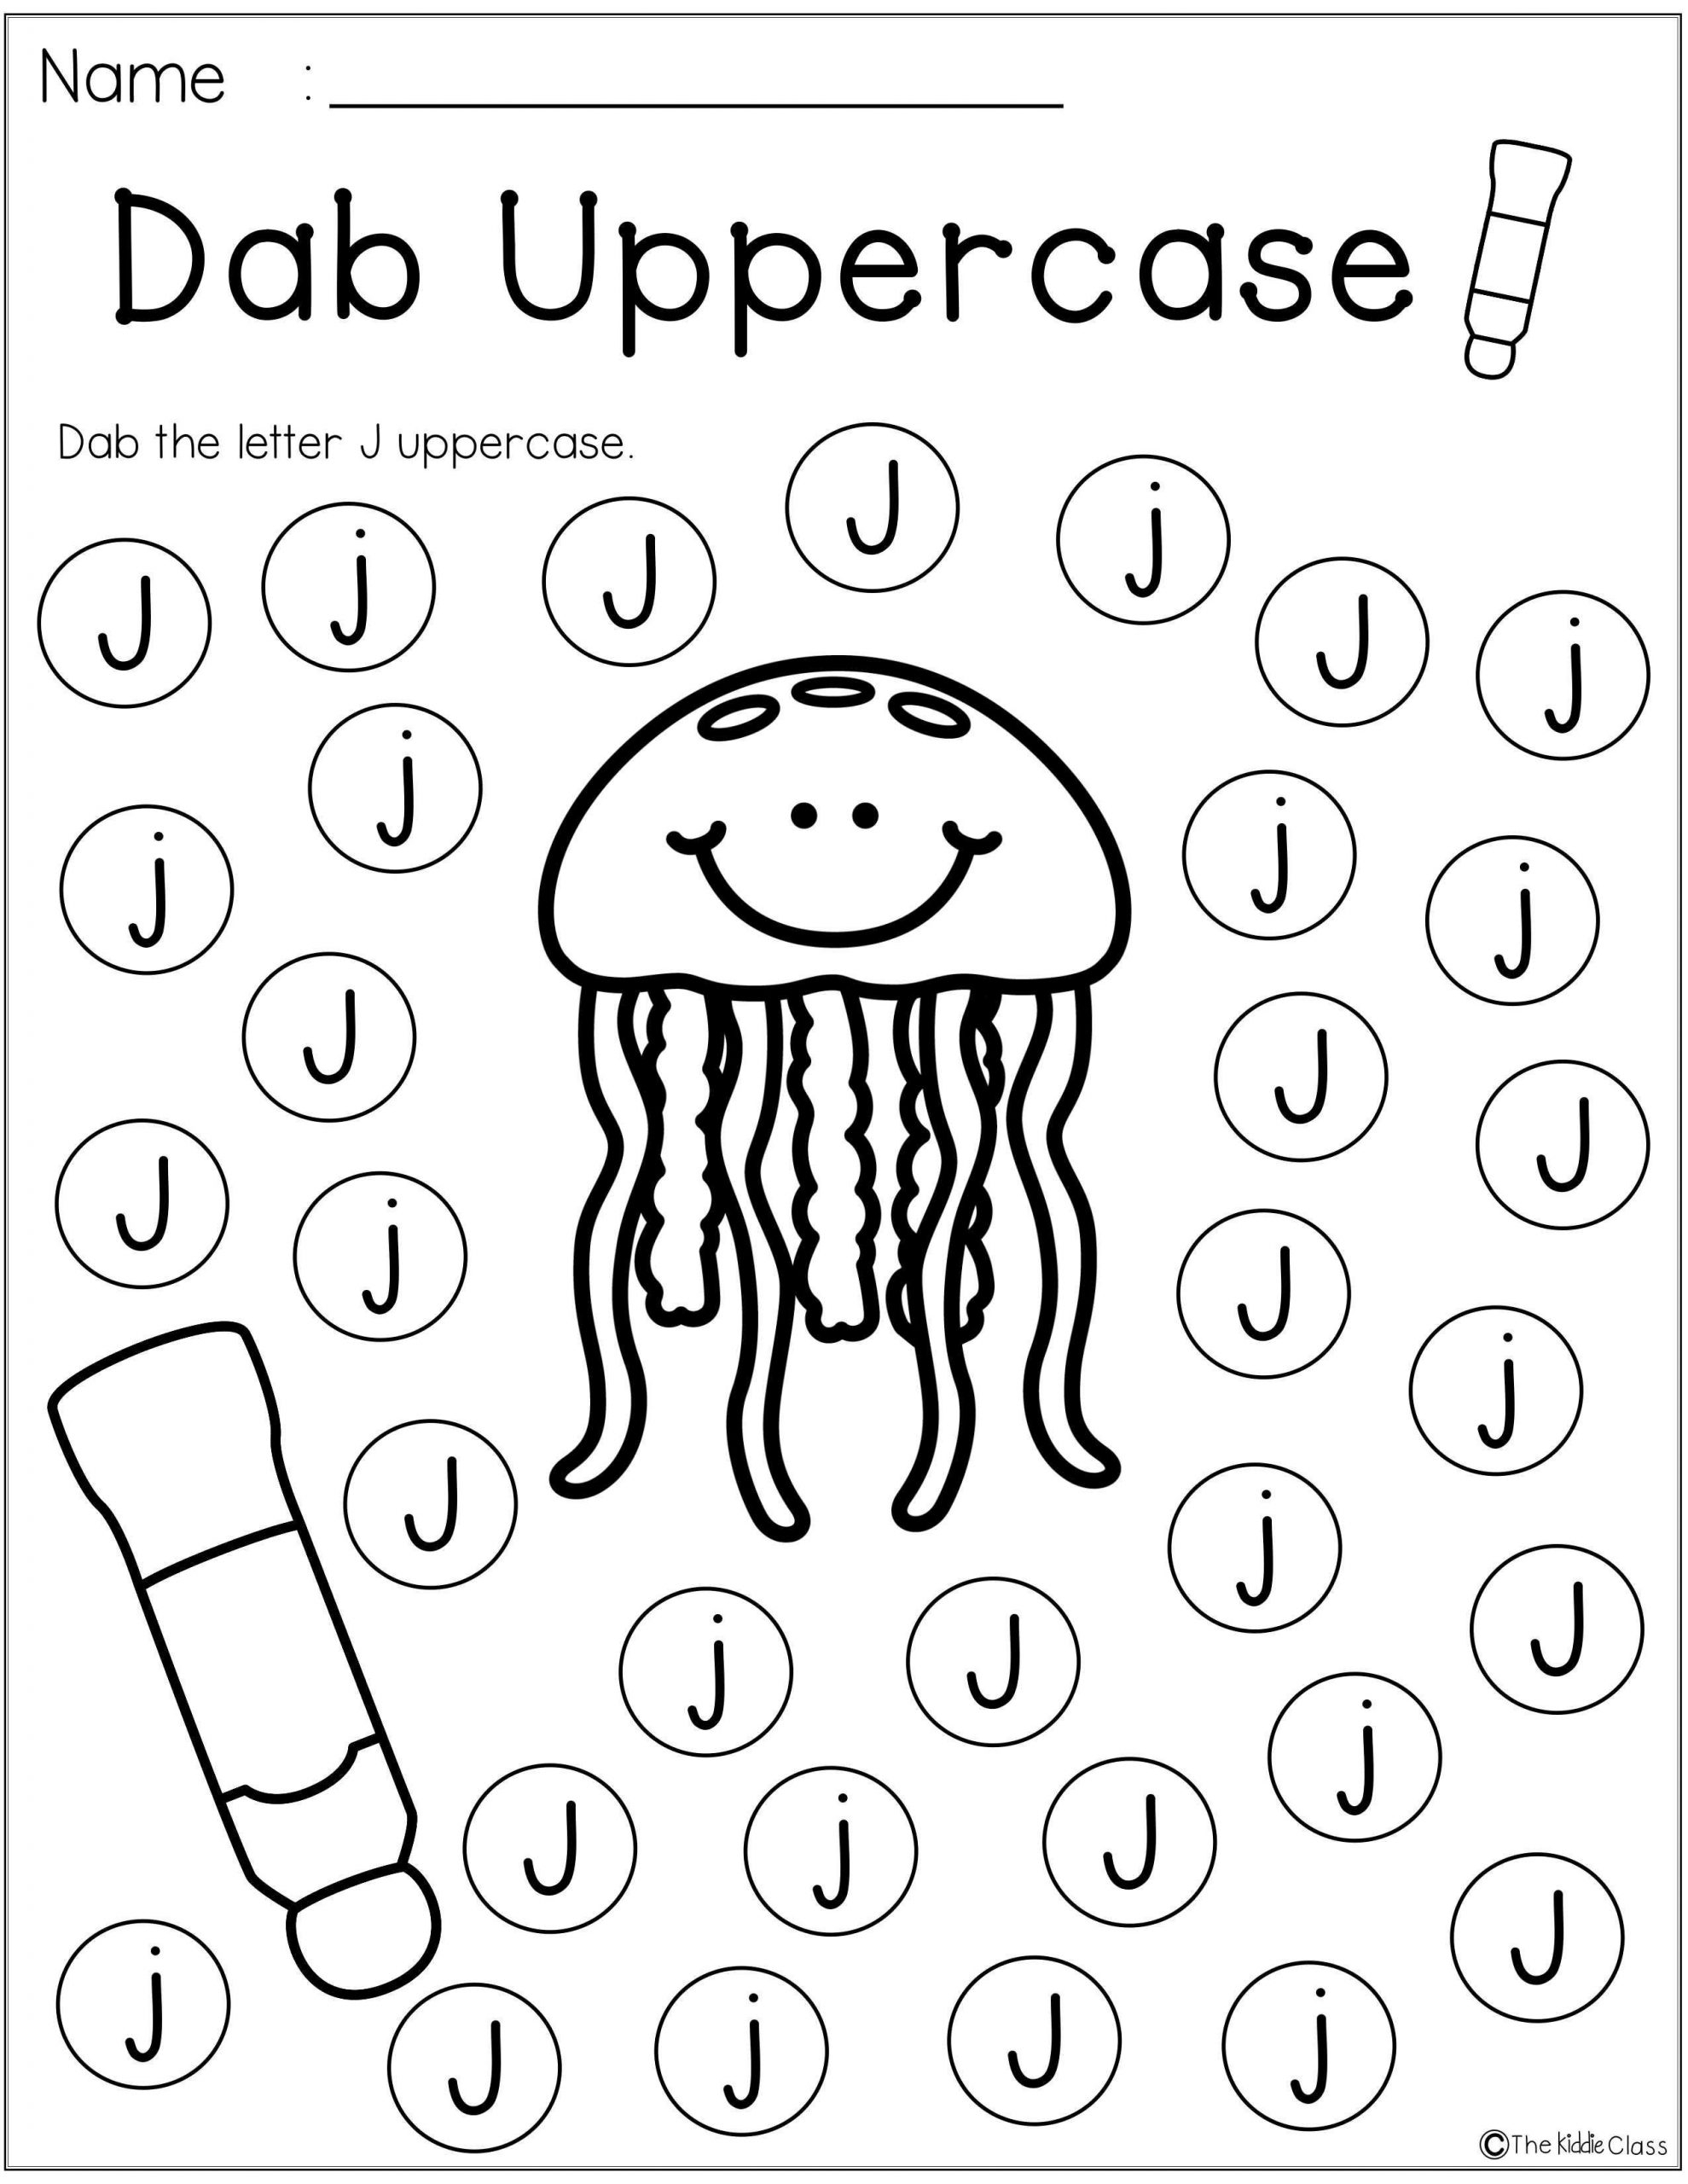 printable-letter-j-worksheets-printable-word-searches